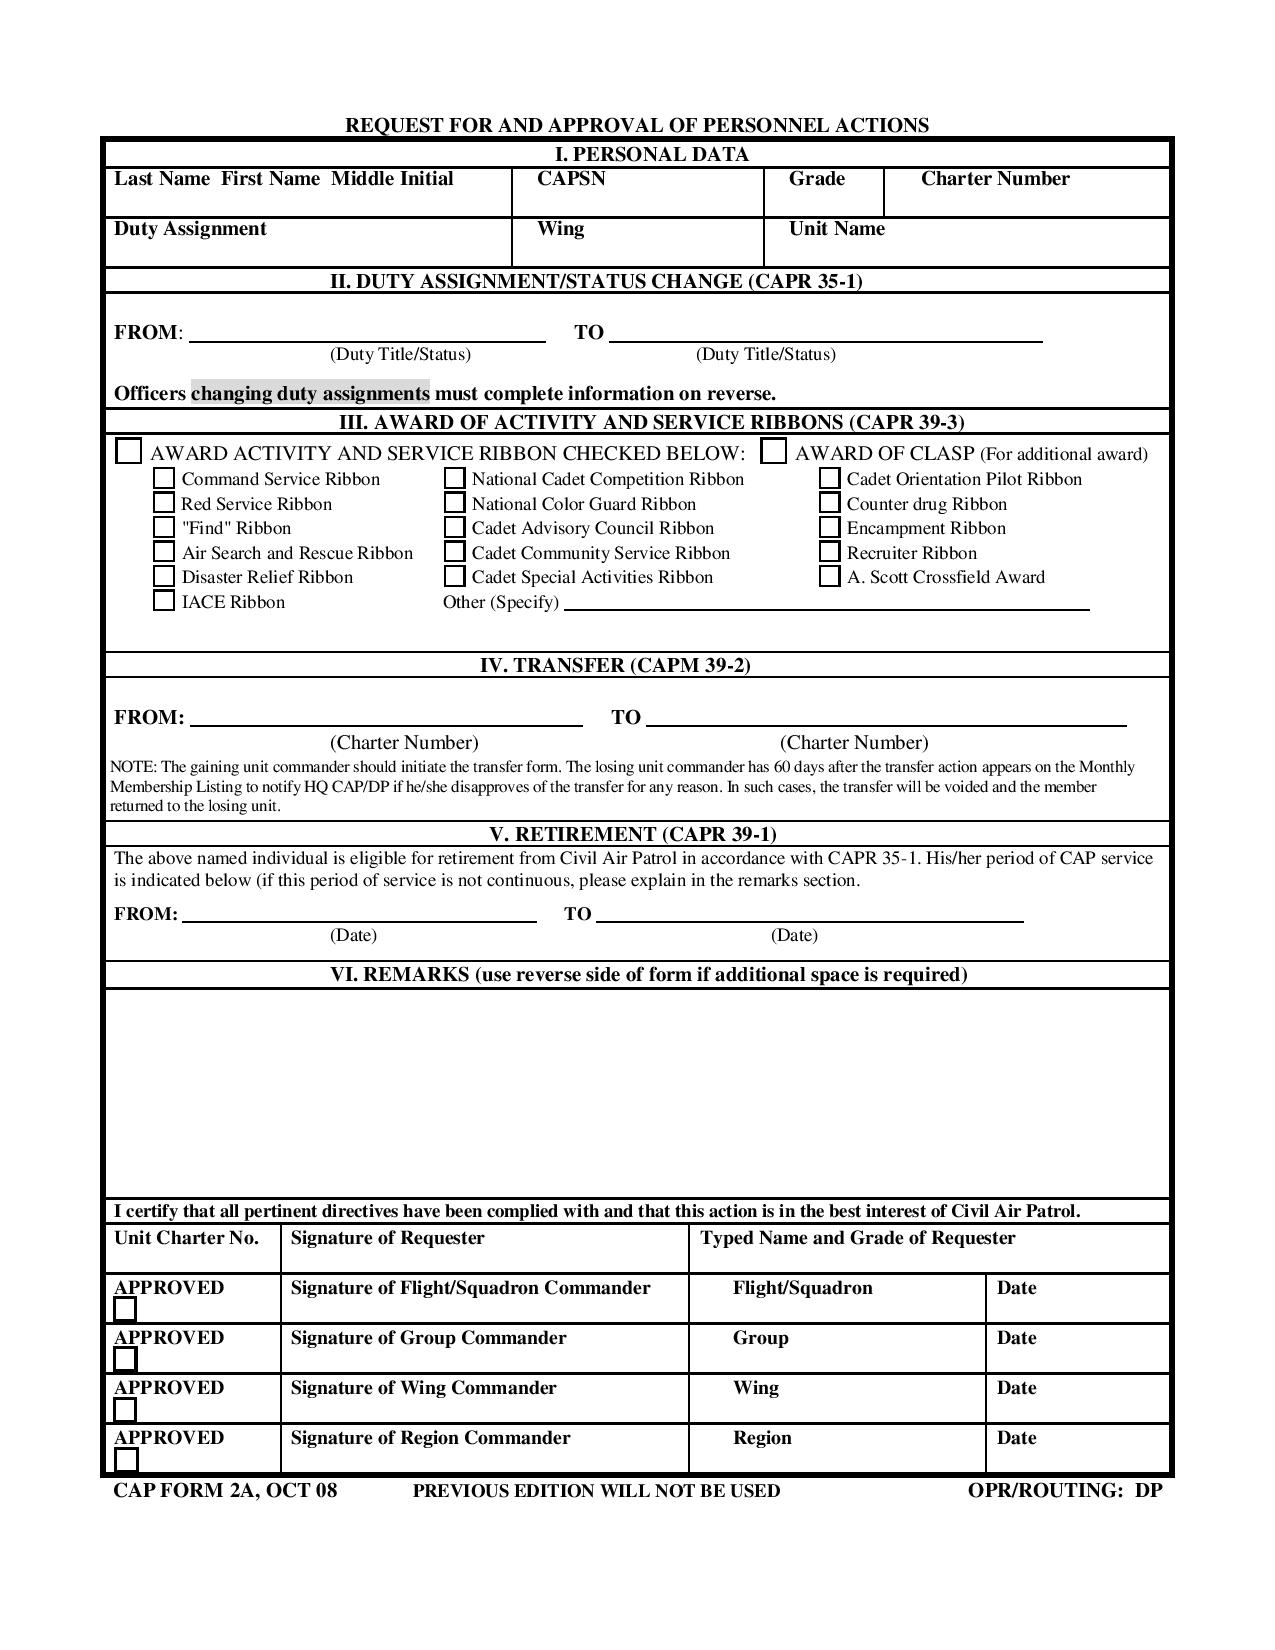 request and approval of personnel action form page 0011